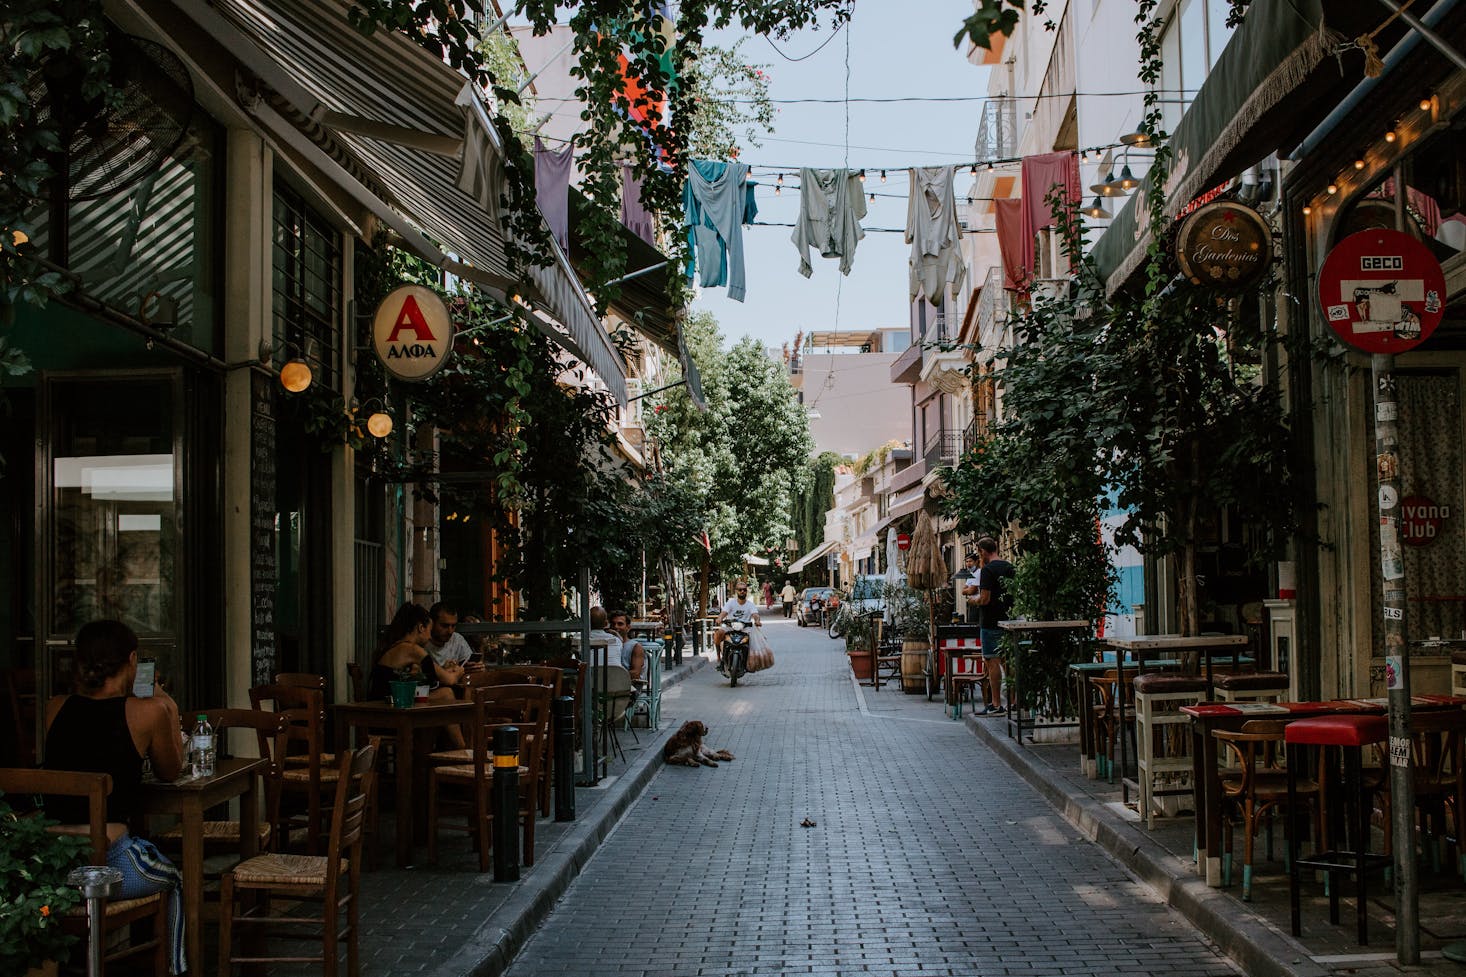 Date night hotspots in Athens